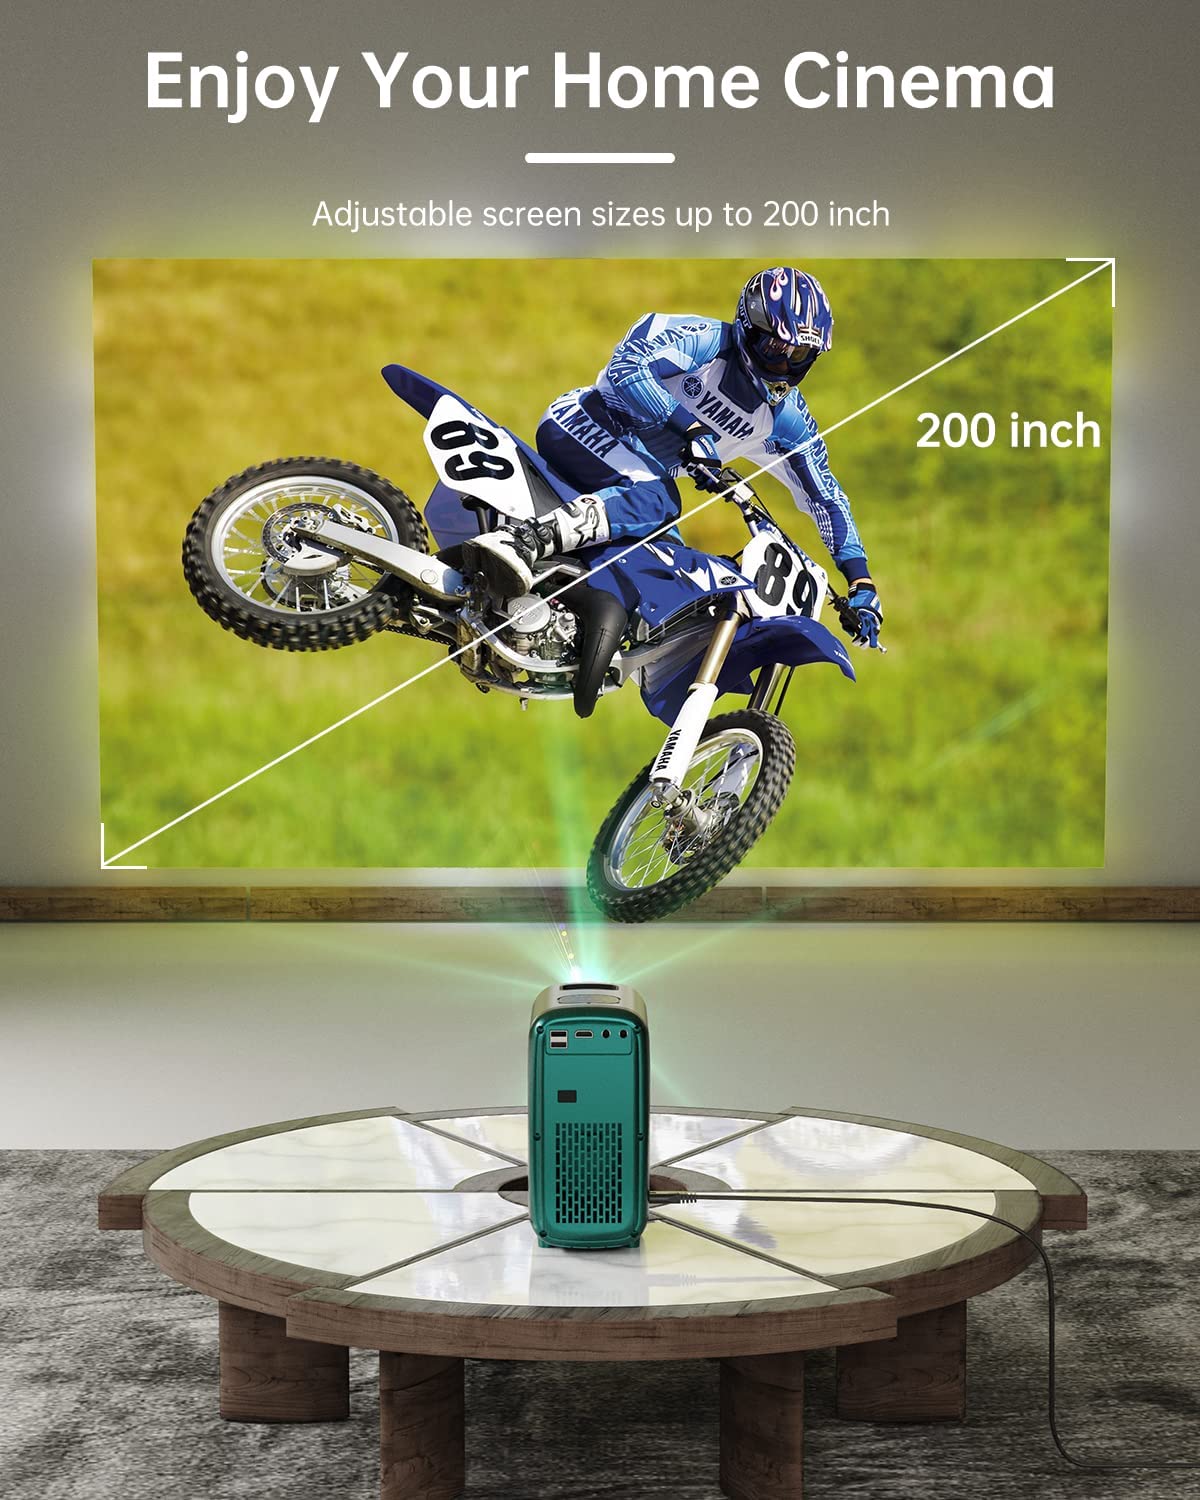 Mini 1080P Bluetooth Projector 4K Movie Projector Portable Home TV Projector Outdoor Video LED Projector Compatible with TV Stick Laptop Phone Tablet HDMI USB DVD